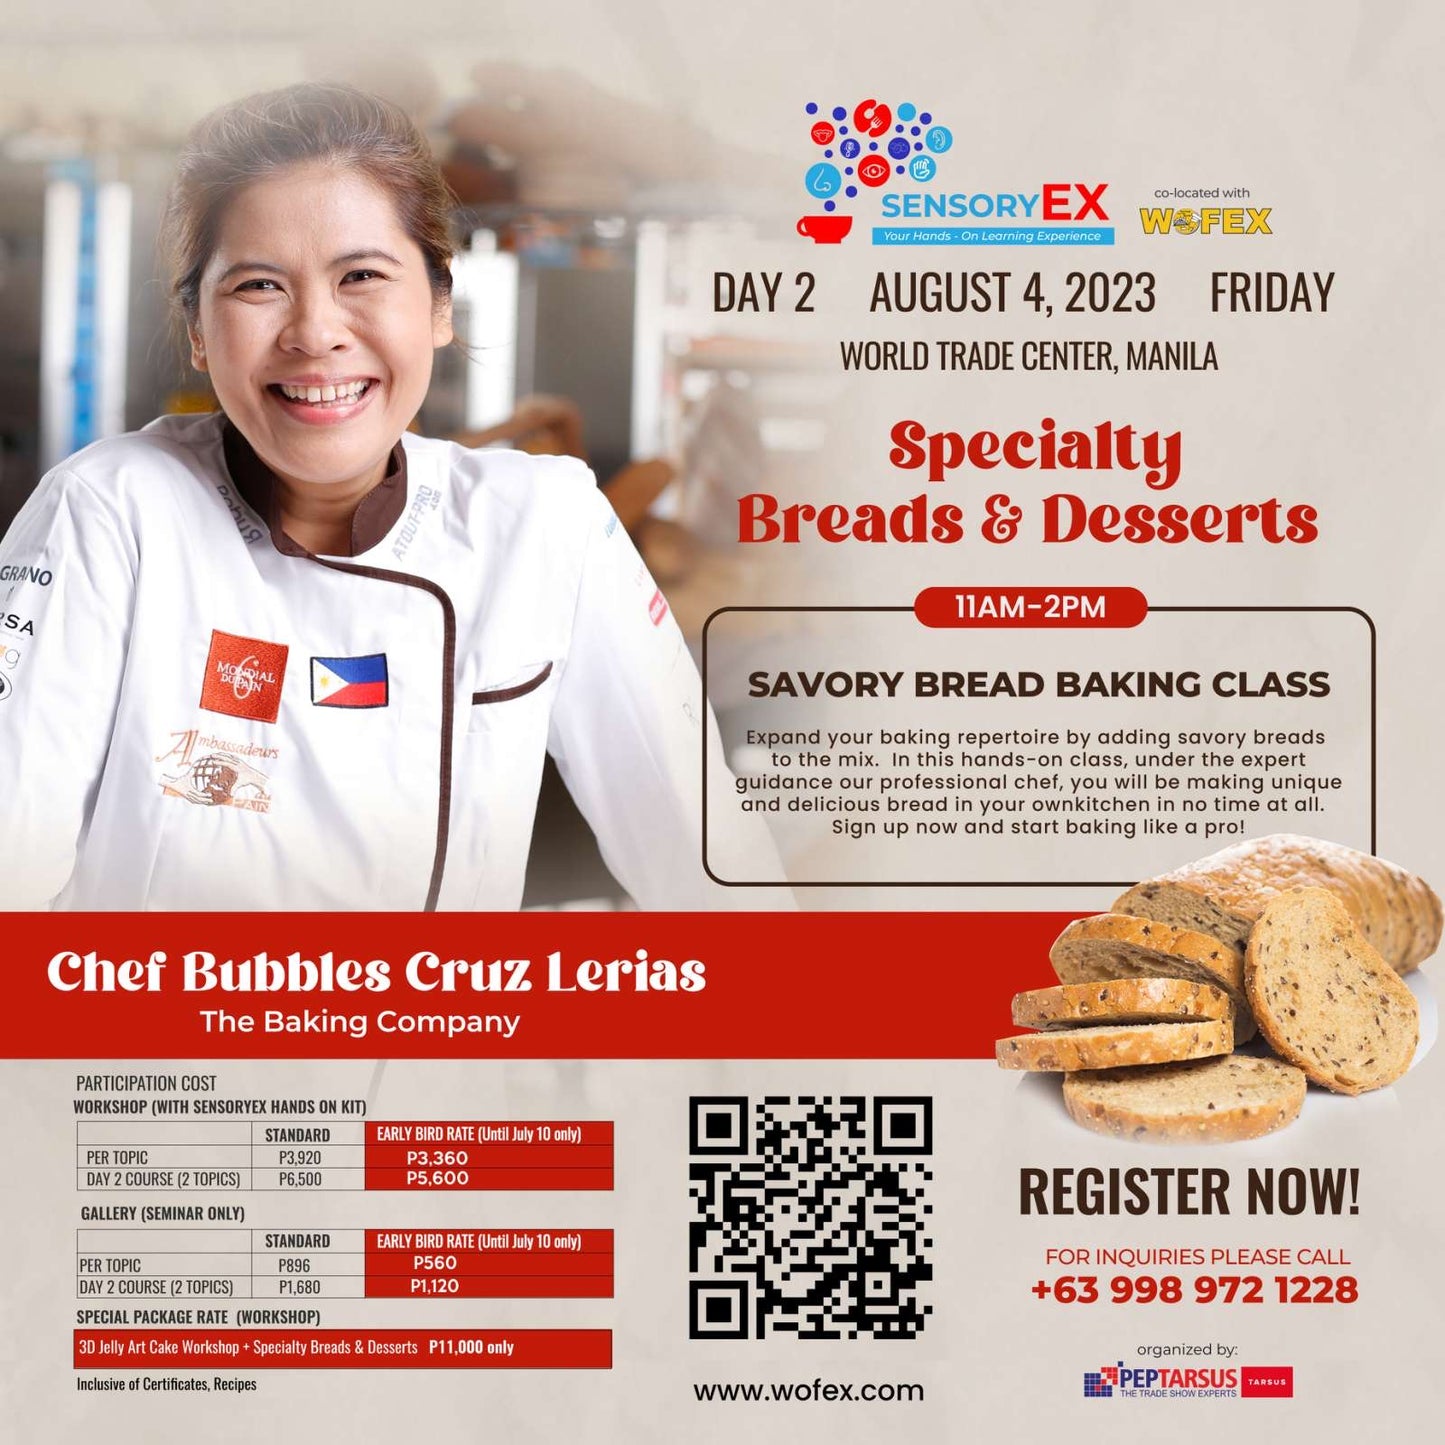 Specialty Breads & Desserts - 2 Sessions - Hands-on Workshop - Whole Day